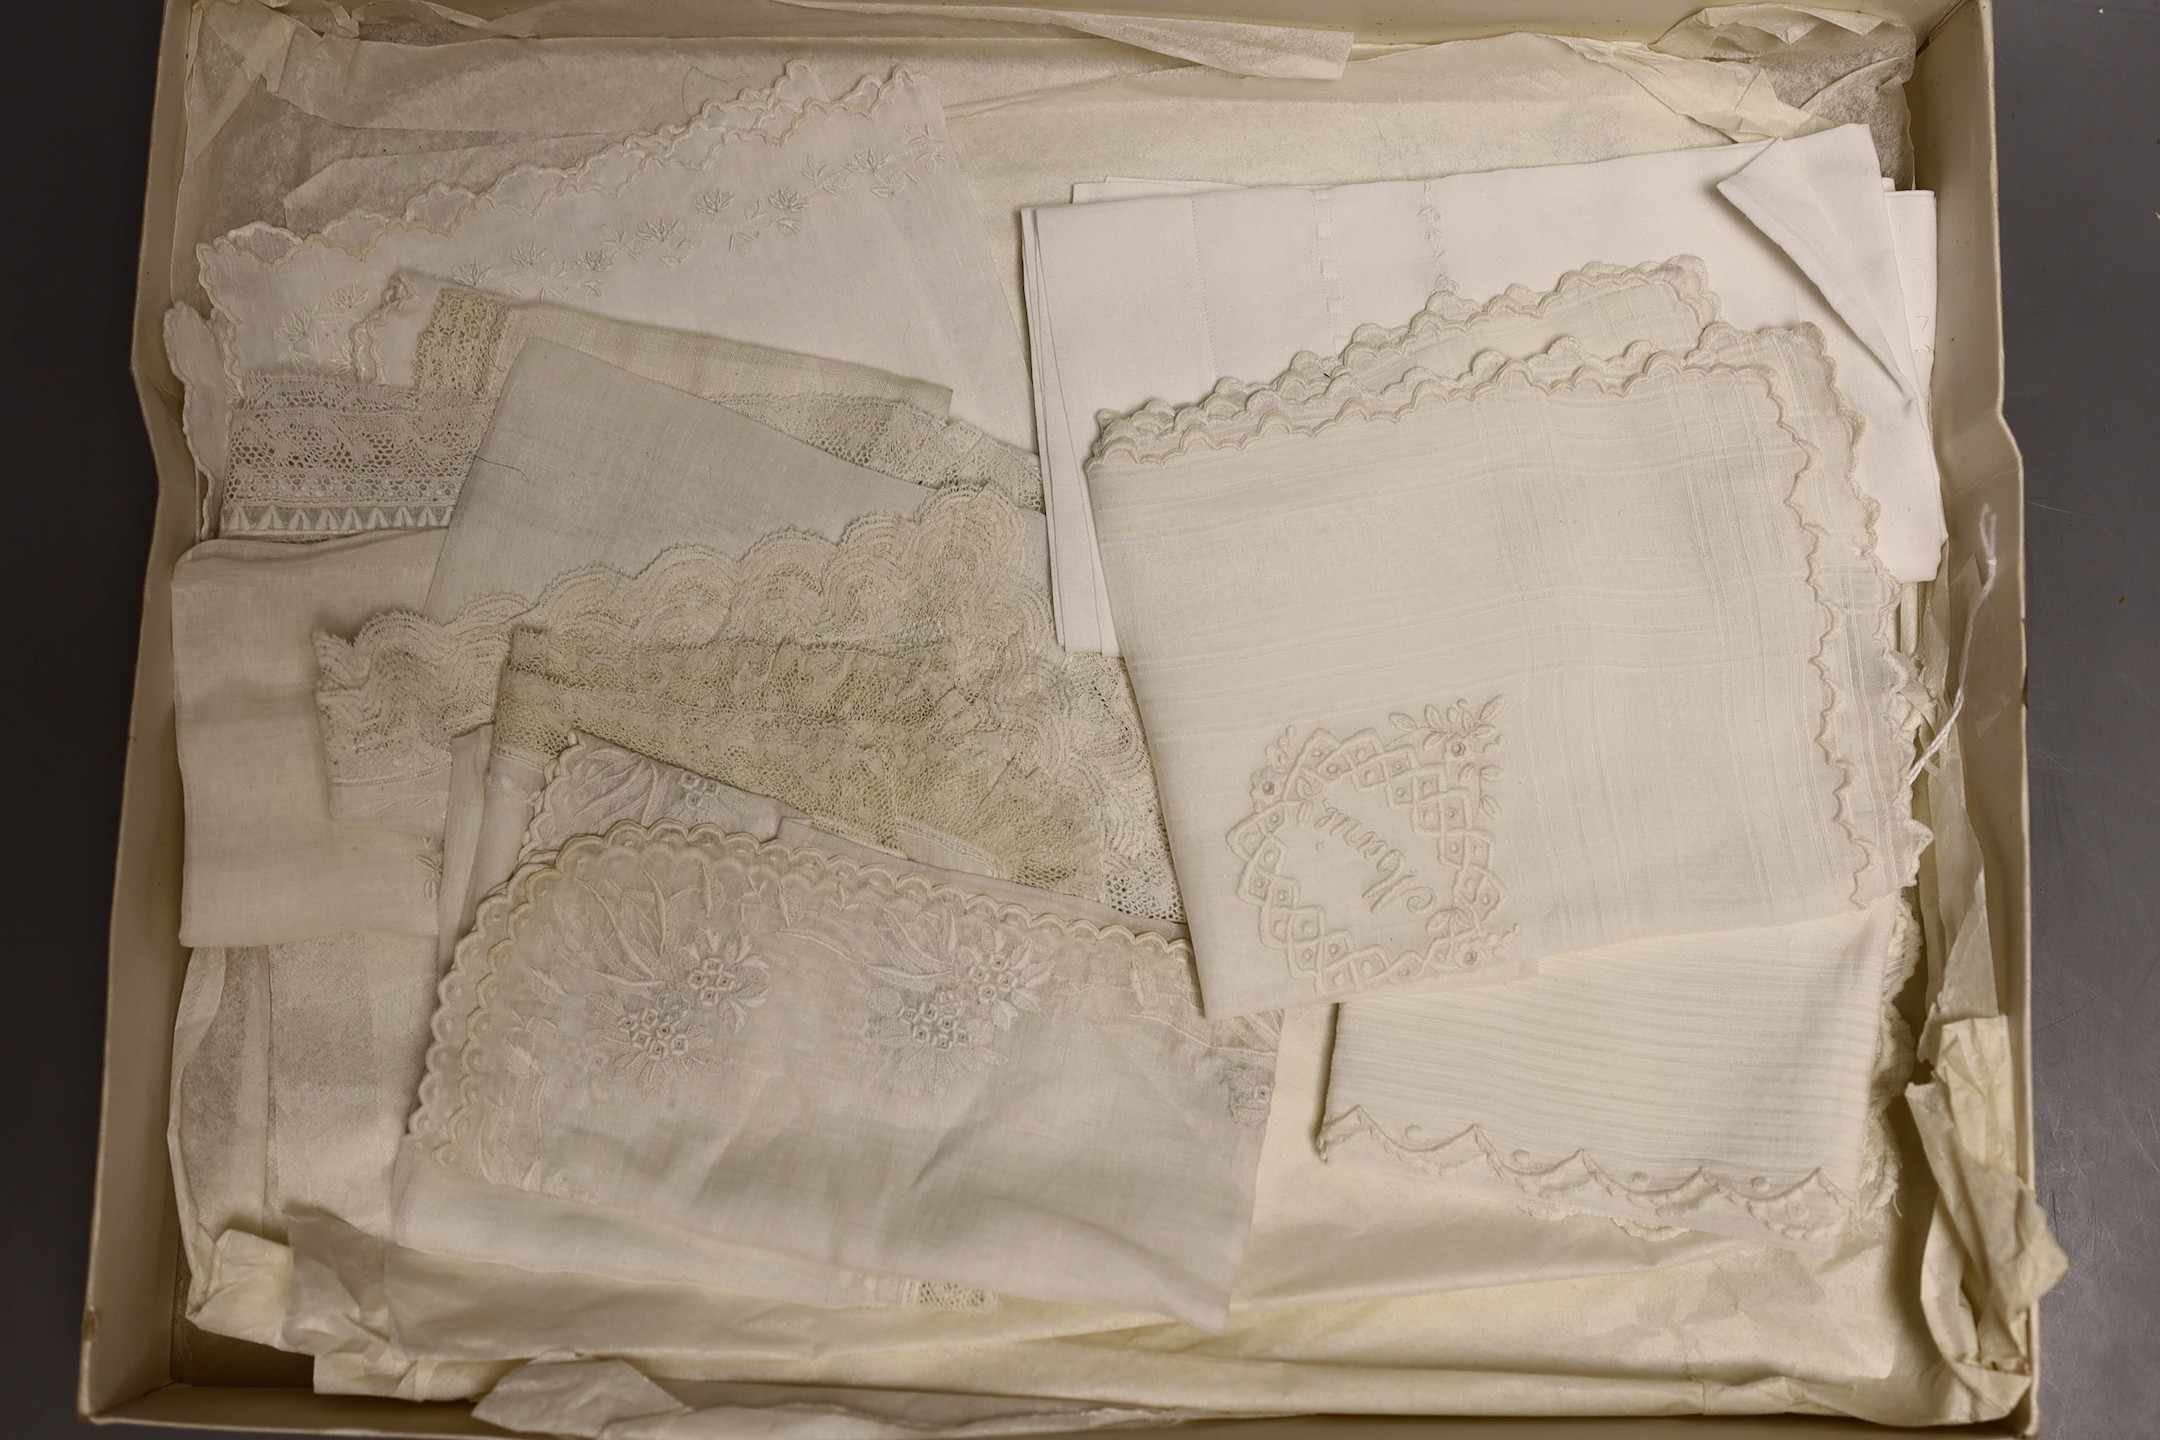 A lace box containing three 19th century Brussels bobbin lace and needle lace hankies and two fine tape lace hankies and a needle run hankie